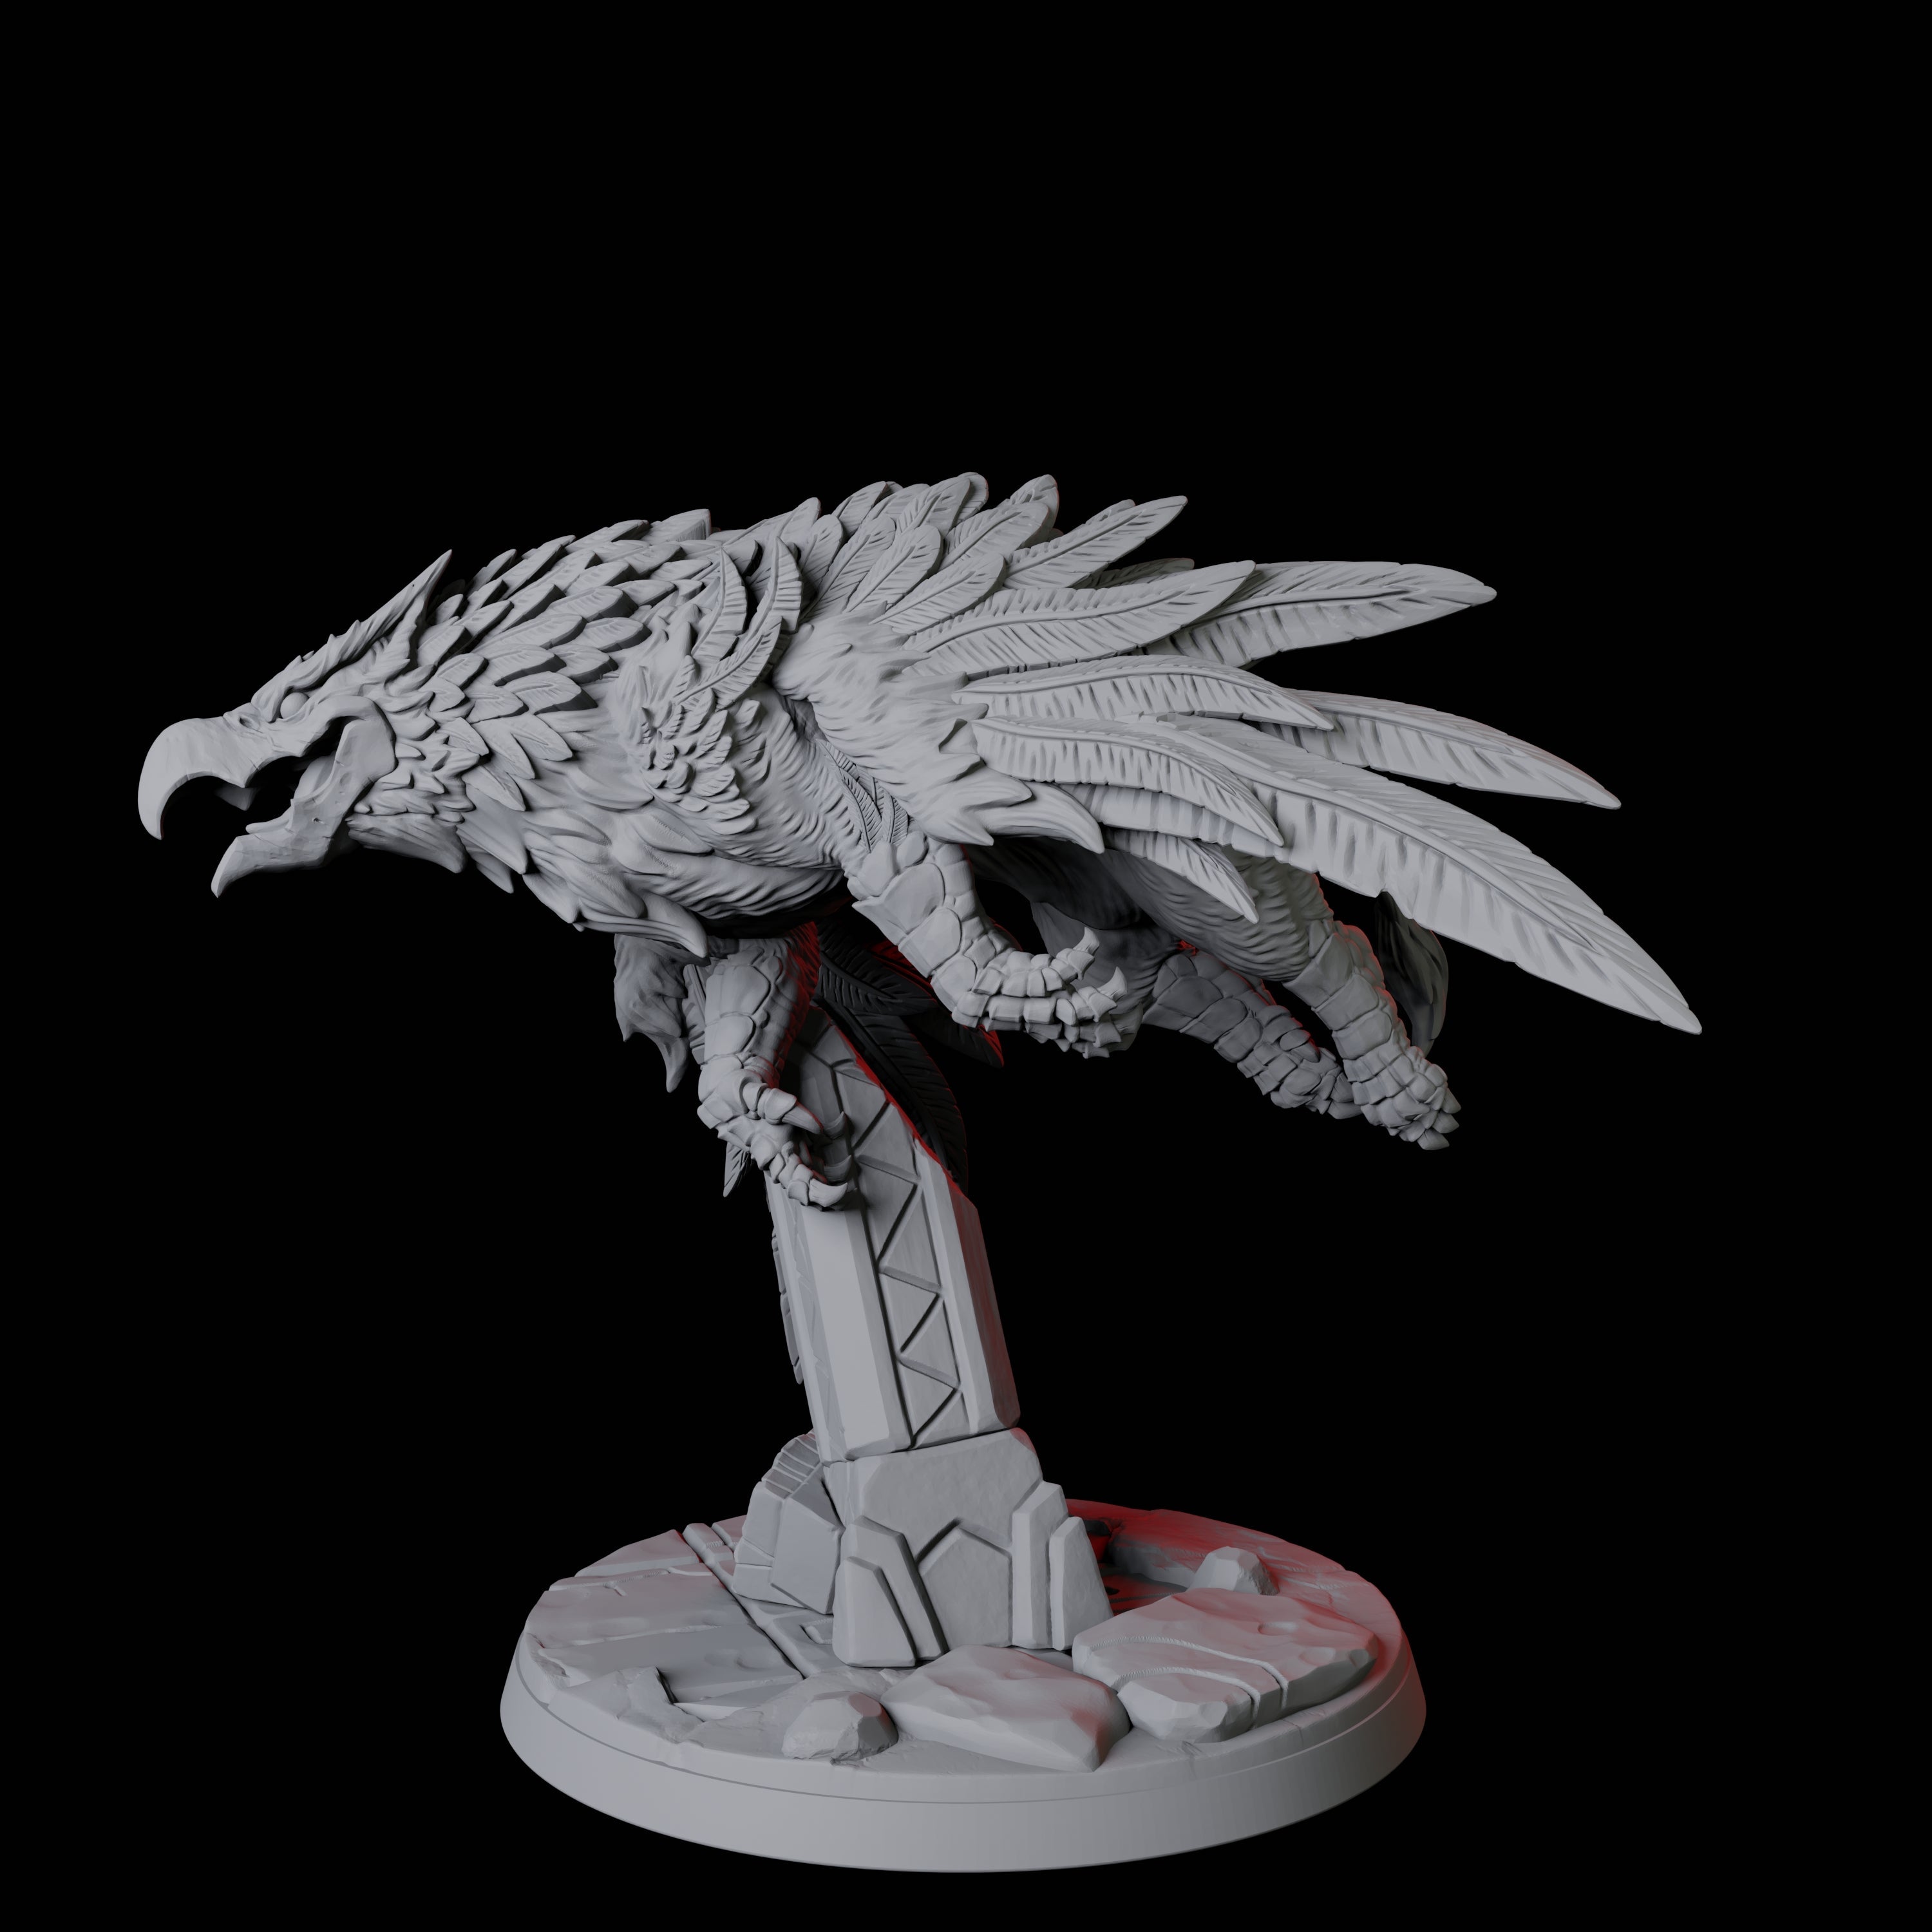 Leaping Griffon B Miniature for Dungeons and Dragons, Pathfinder or other TTRPGs